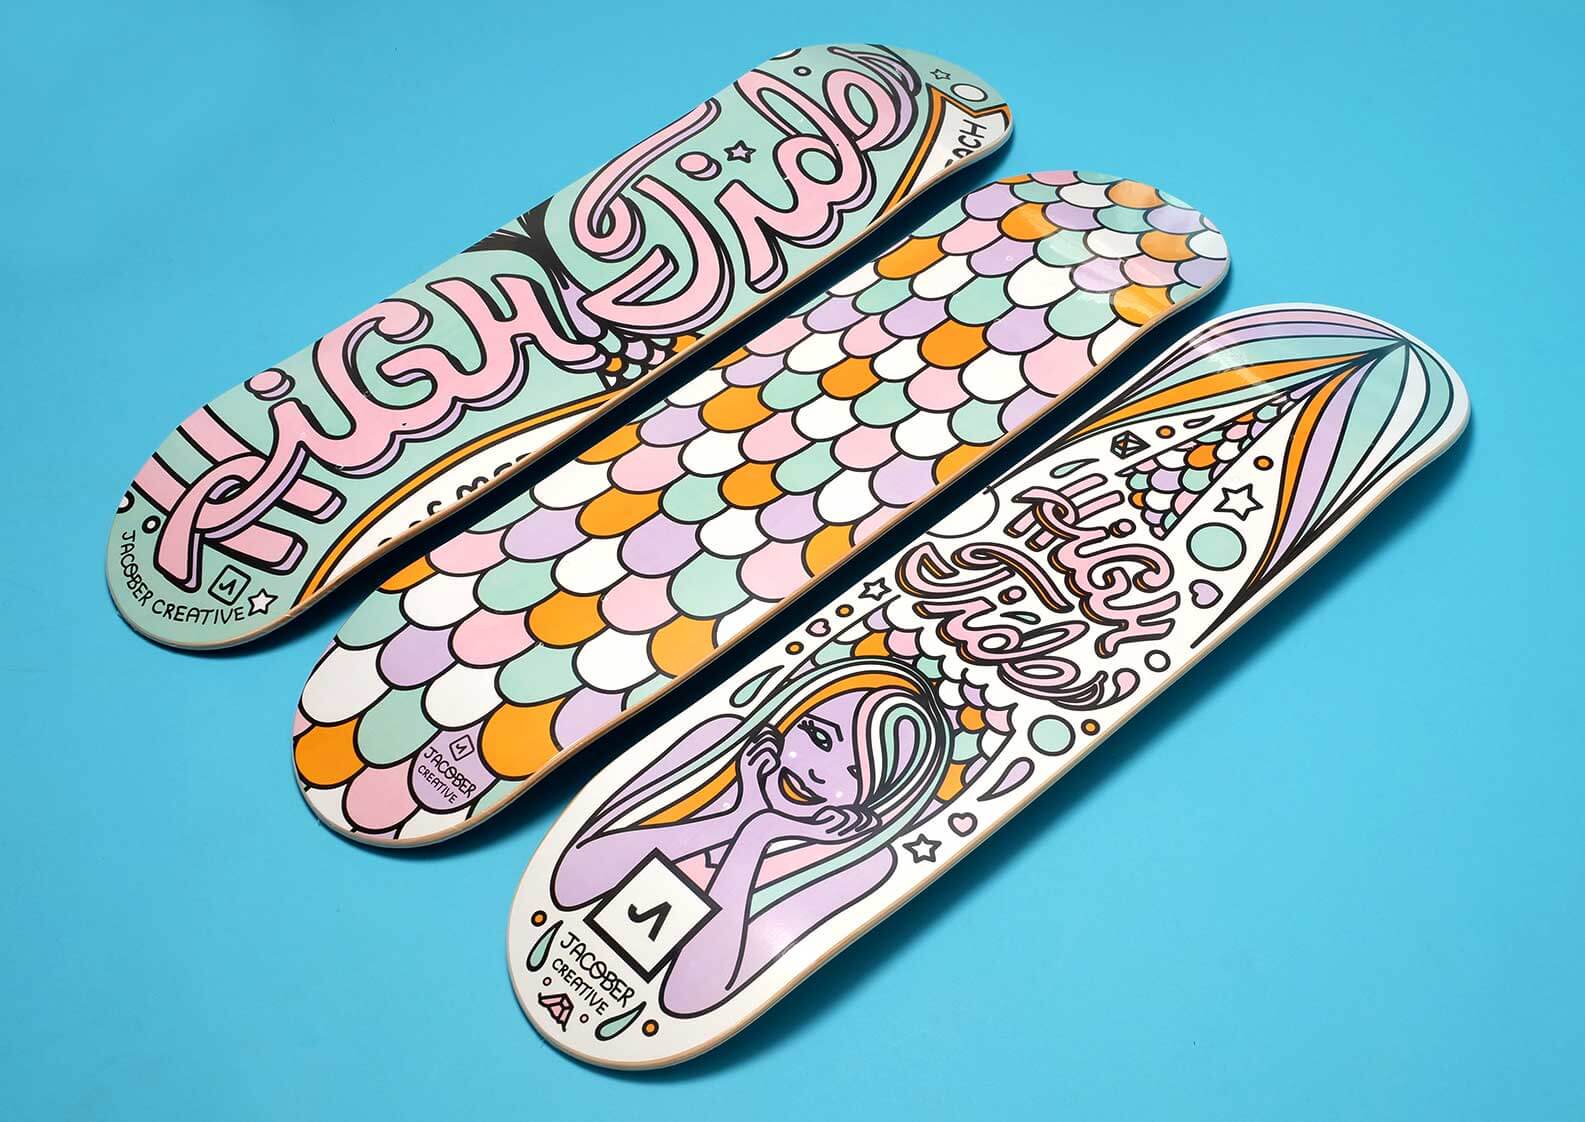 High Tides Miami Beach coloring book printed on skateboards by Jacober Creative